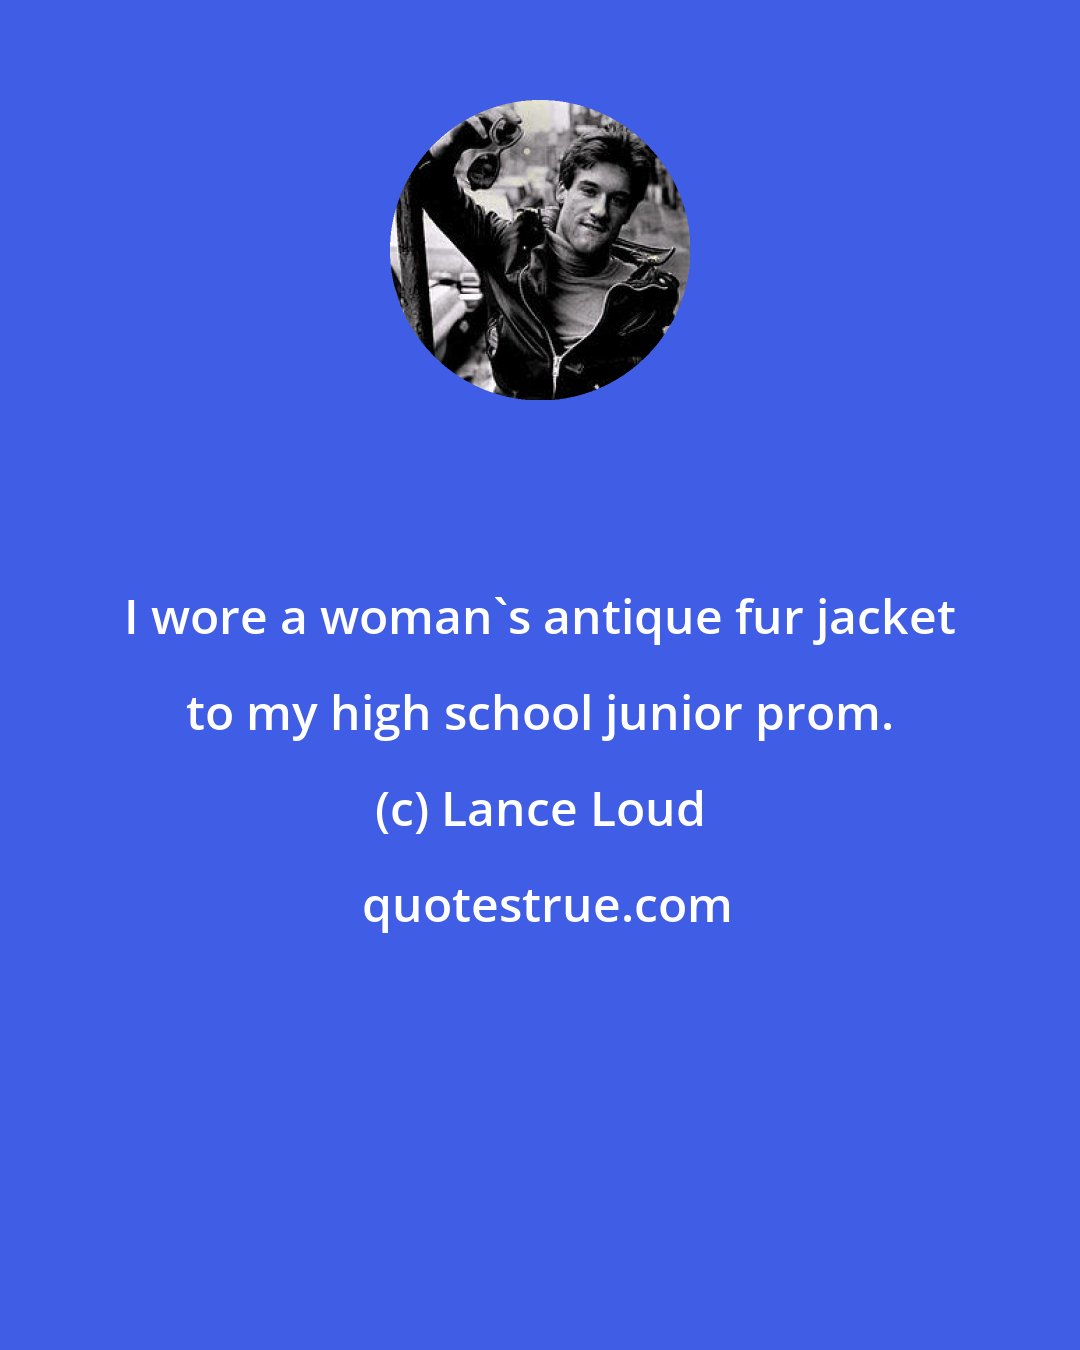 Lance Loud: I wore a woman's antique fur jacket to my high school junior prom.